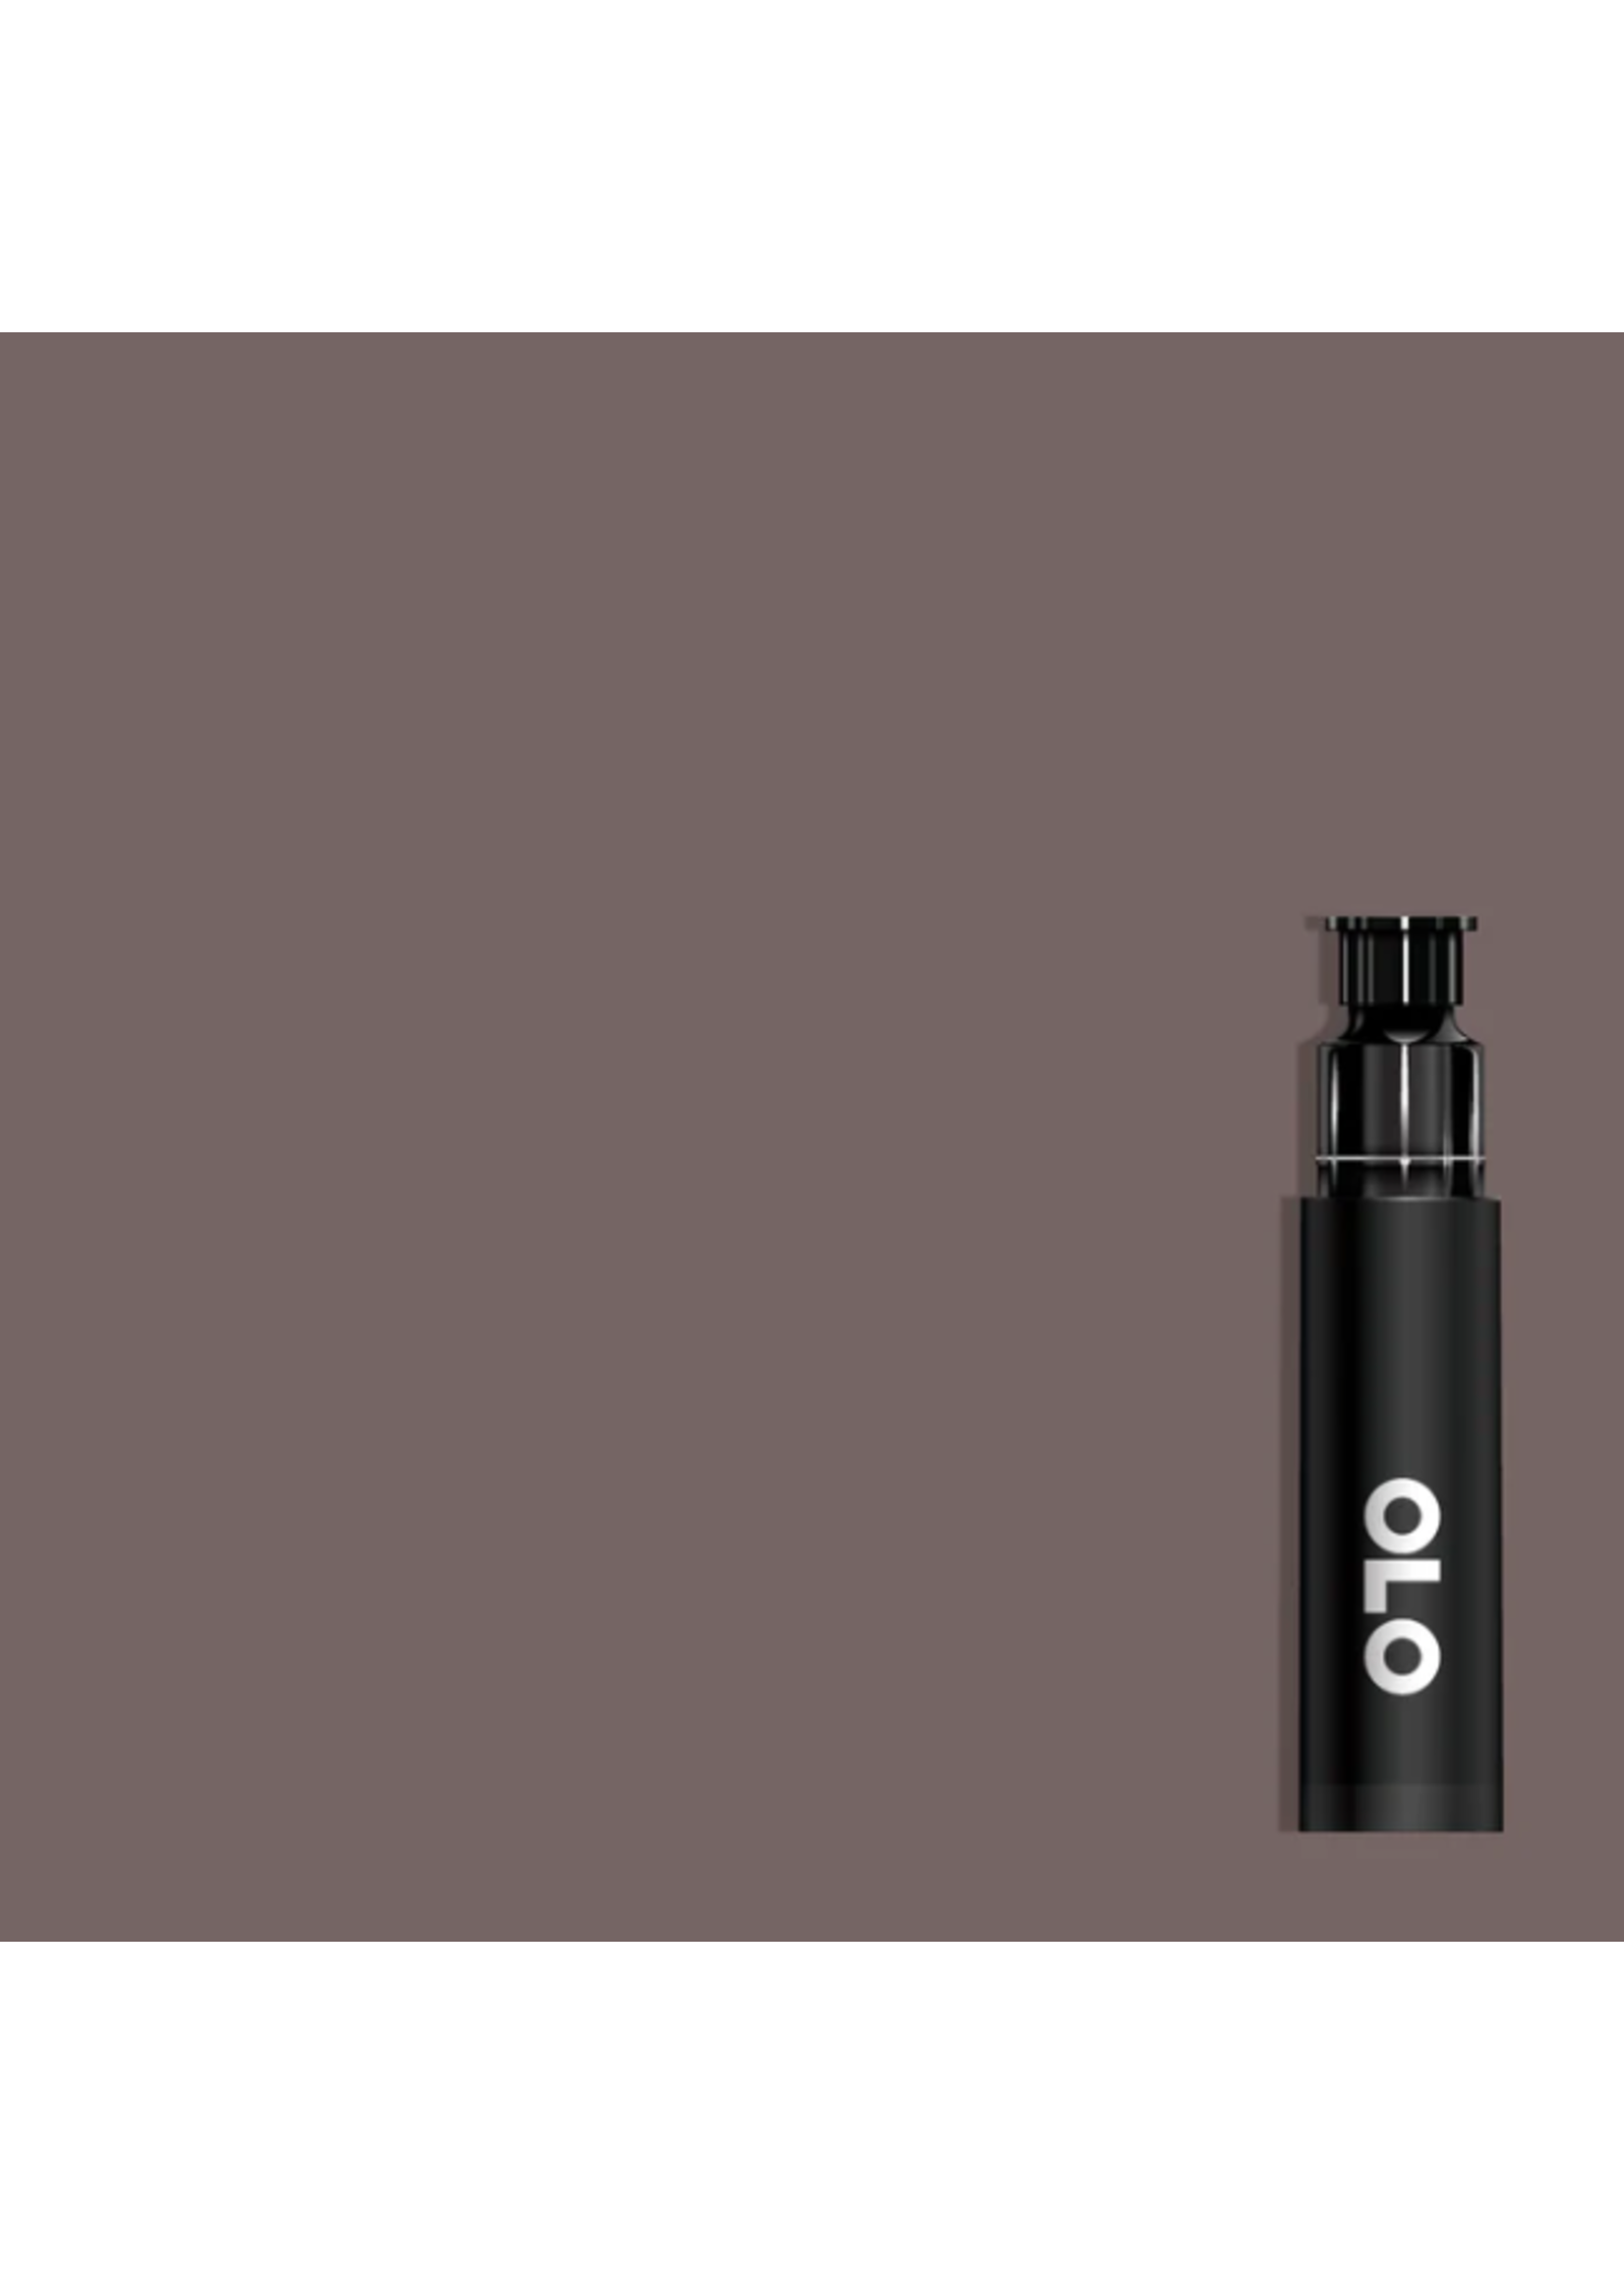 OLO OLO Brush Replacement Cartridge: Red Gray 5